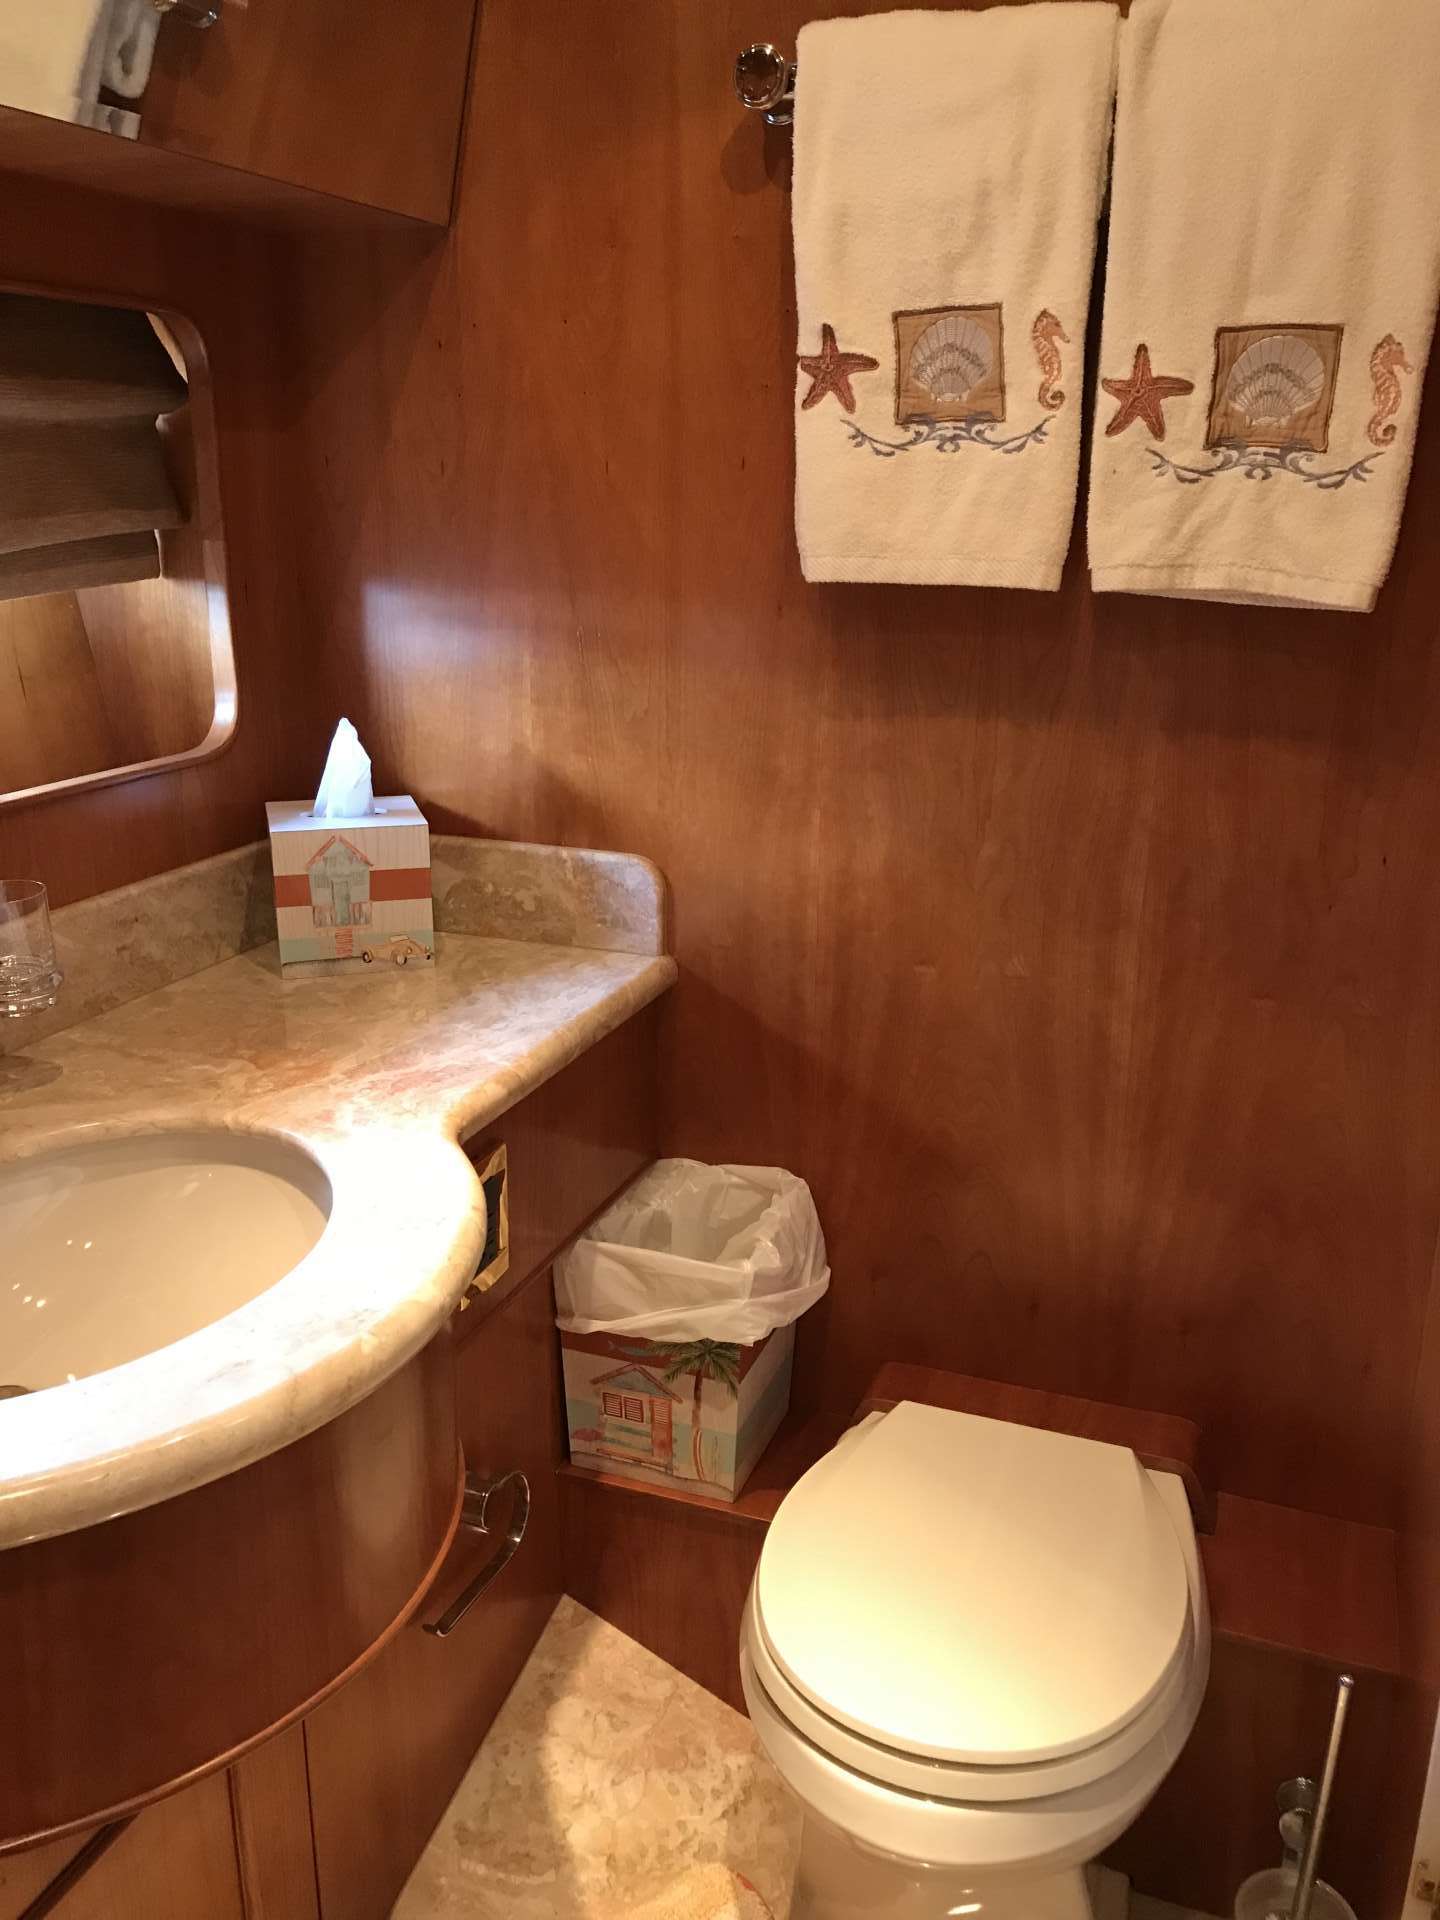 Guest stateroom bathroom